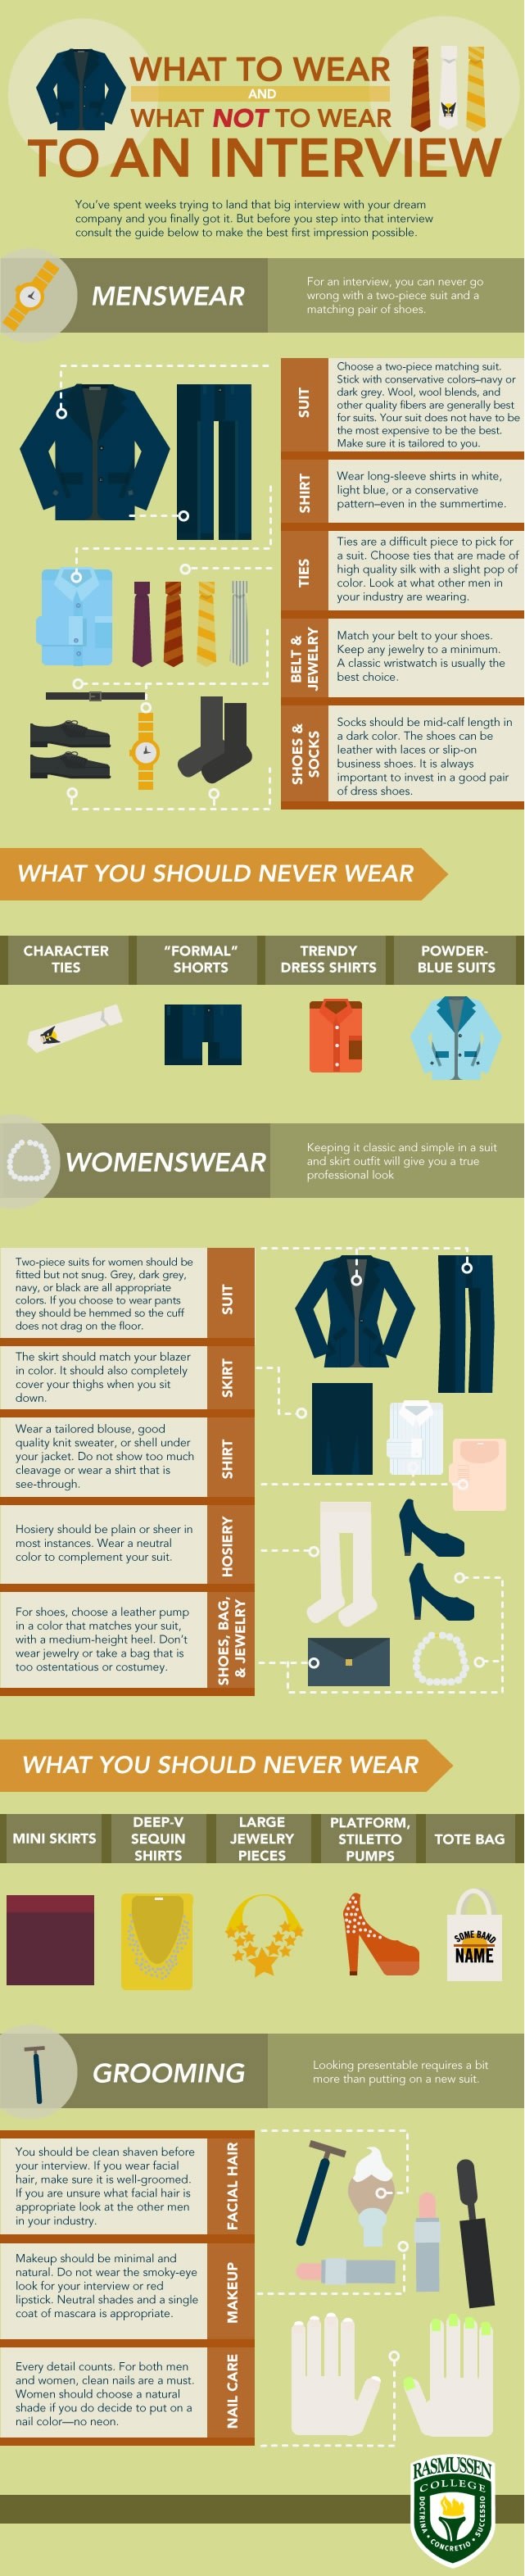 Interview_what to wear